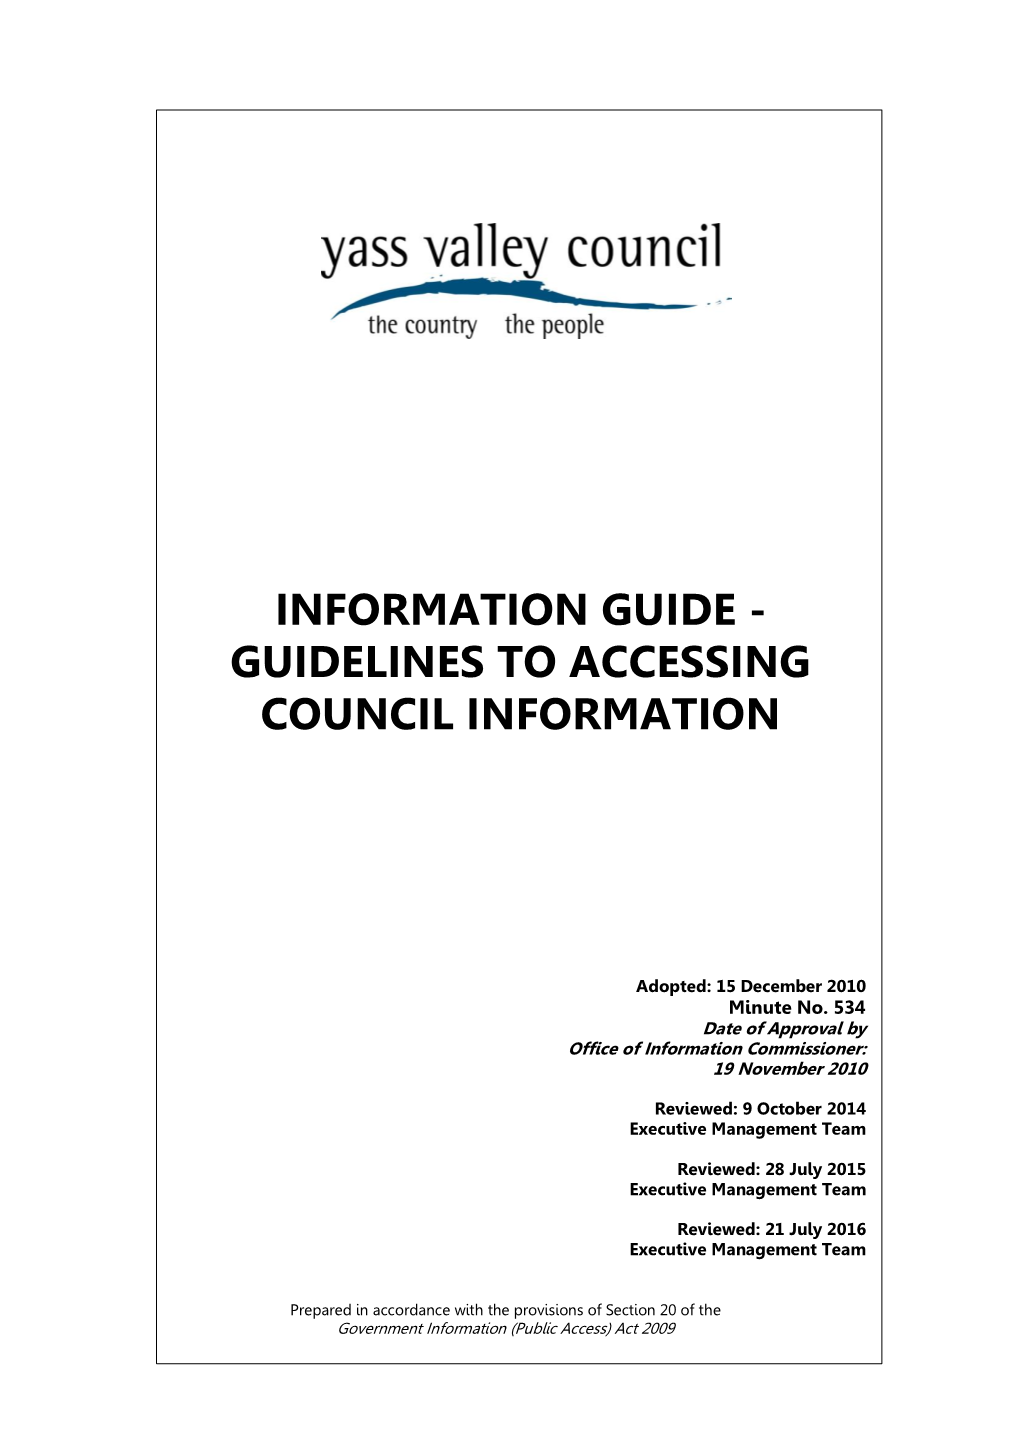 Information Guide - Guidelines to Accessing Council Information